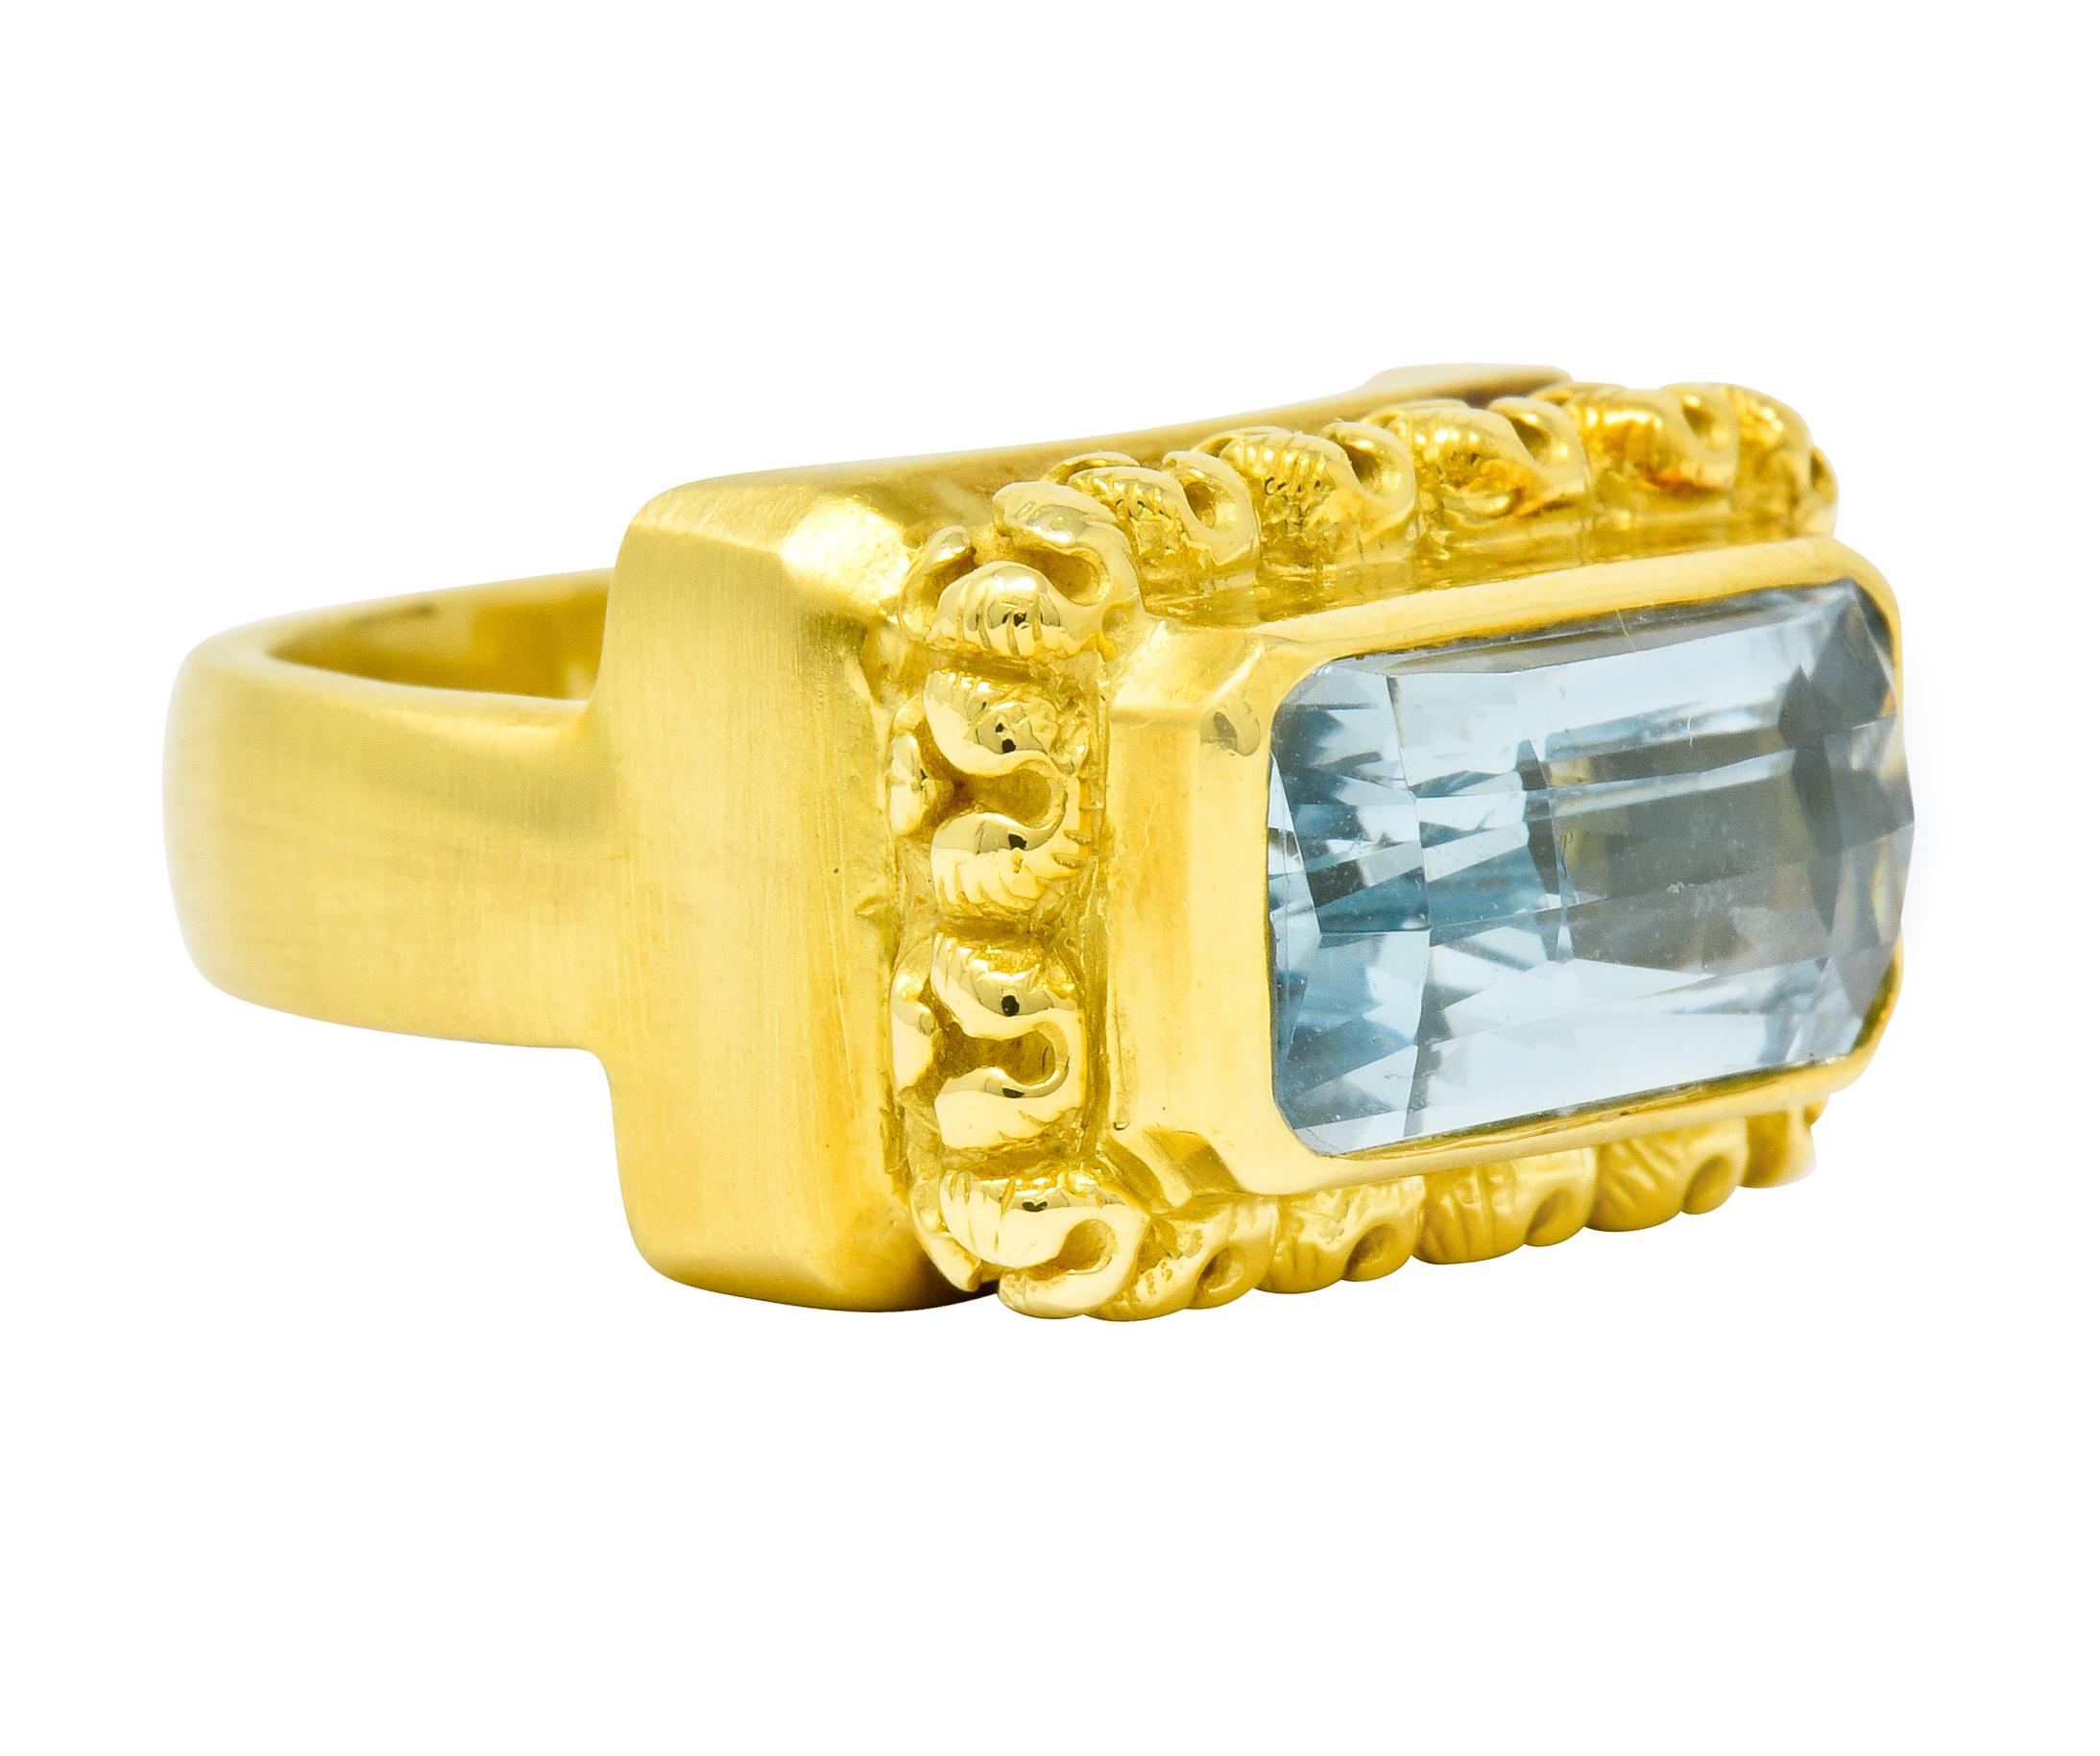 Centering a bezel set rectangular checkerboard cut aquamarine measuring approximately 14.0 x 7.0 mm; transparent and light blue in color

With a highly rendered blossom surround and pierced undercarriage details

Completed by a strong satin